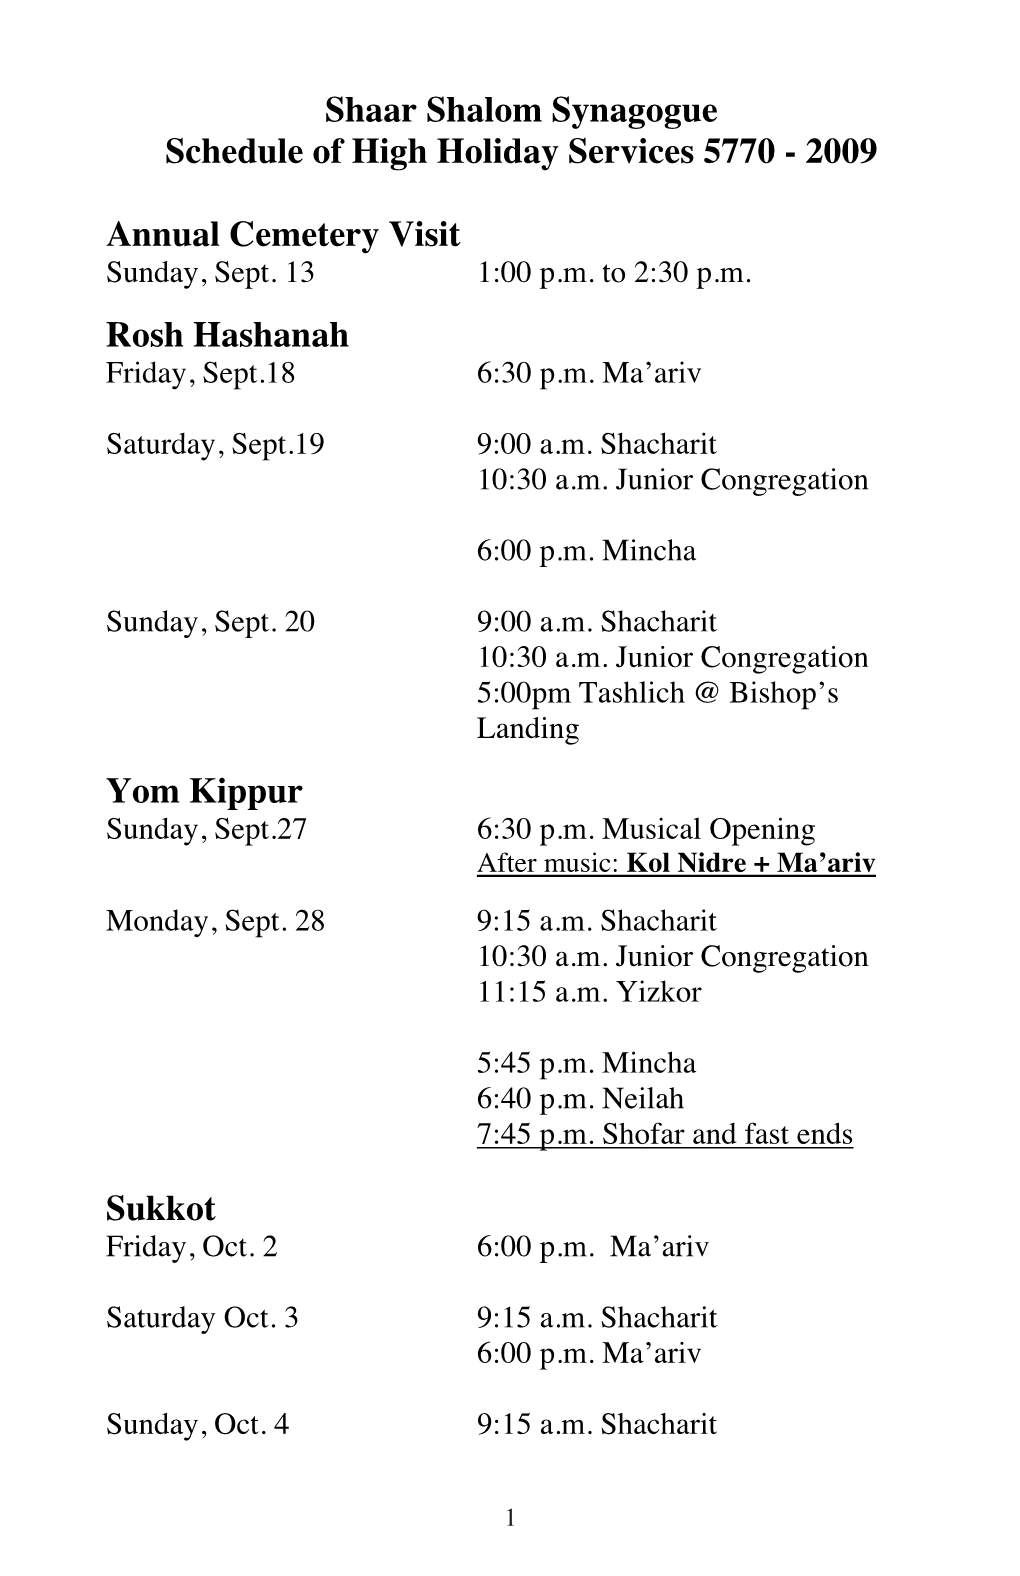 Shaar Shalom Synagogue Schedule of High Holiday Services 5770 - 2009